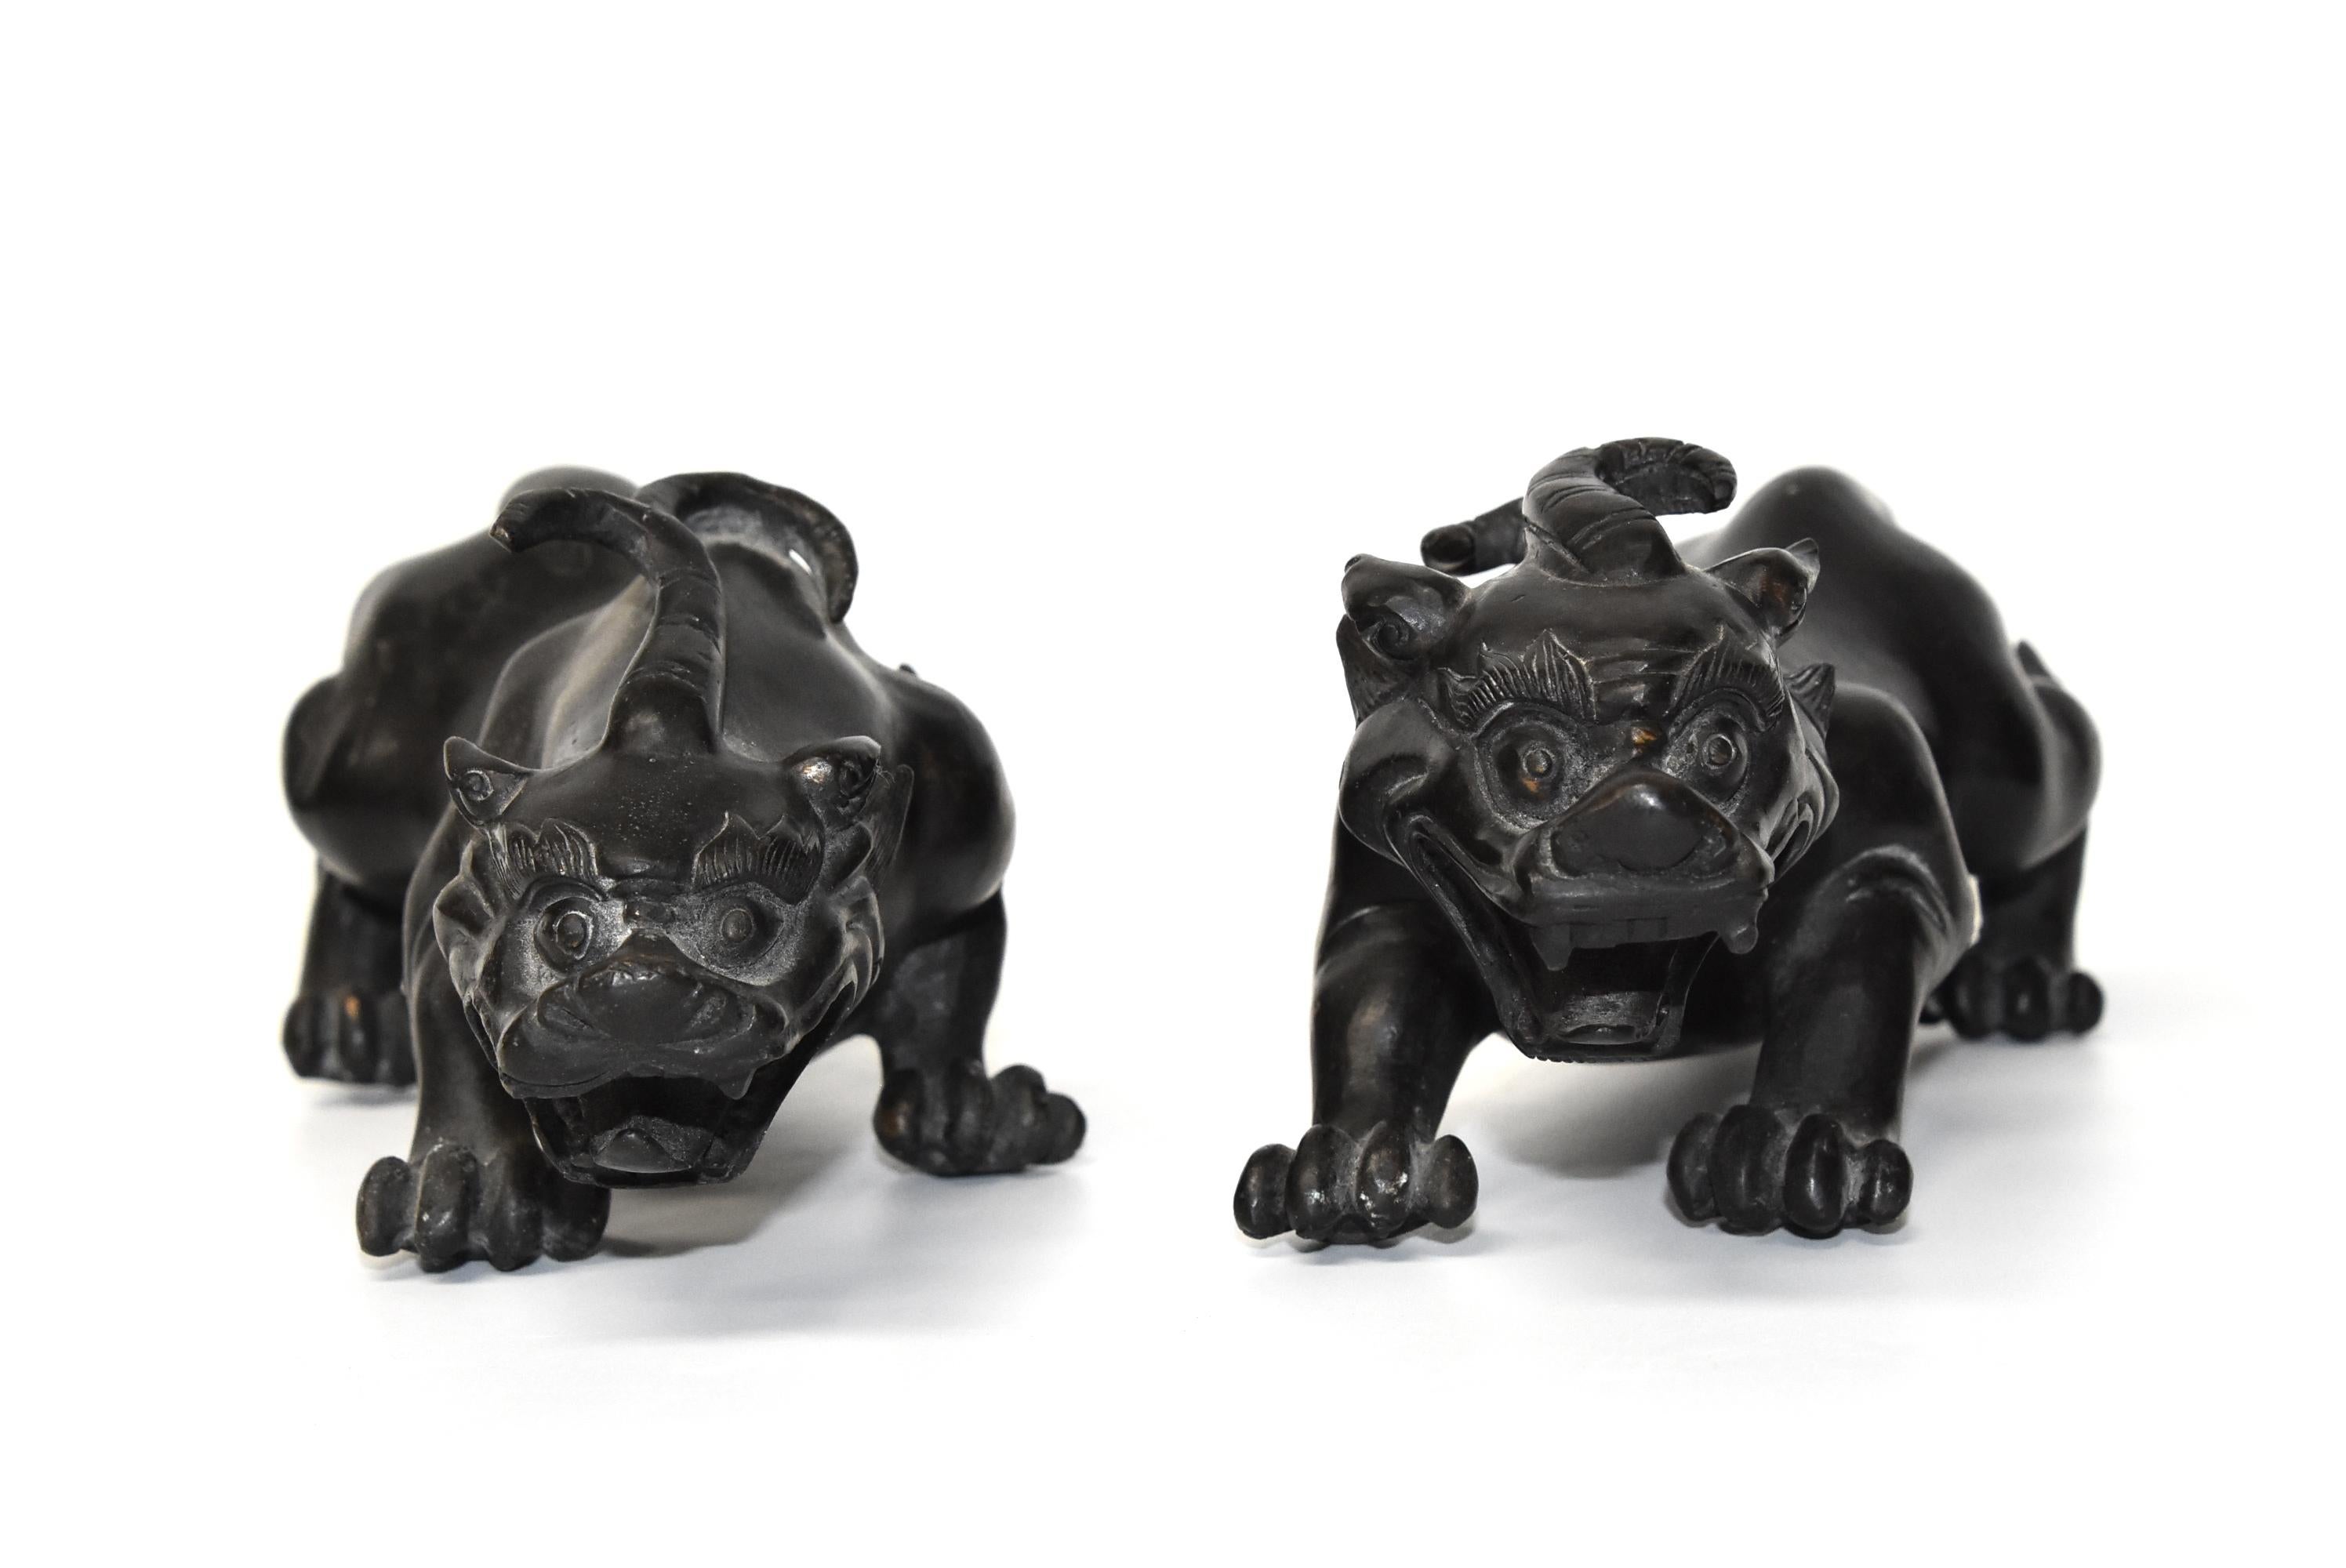 A pair of heavy, substantial bronze Pi Xiu beasts. These animals are mythical beasts believed to bring and keep wealth and good fortune. The artistry and craftsmanship is fantastic, depicting their ribs and muscles clearly and realistically. The